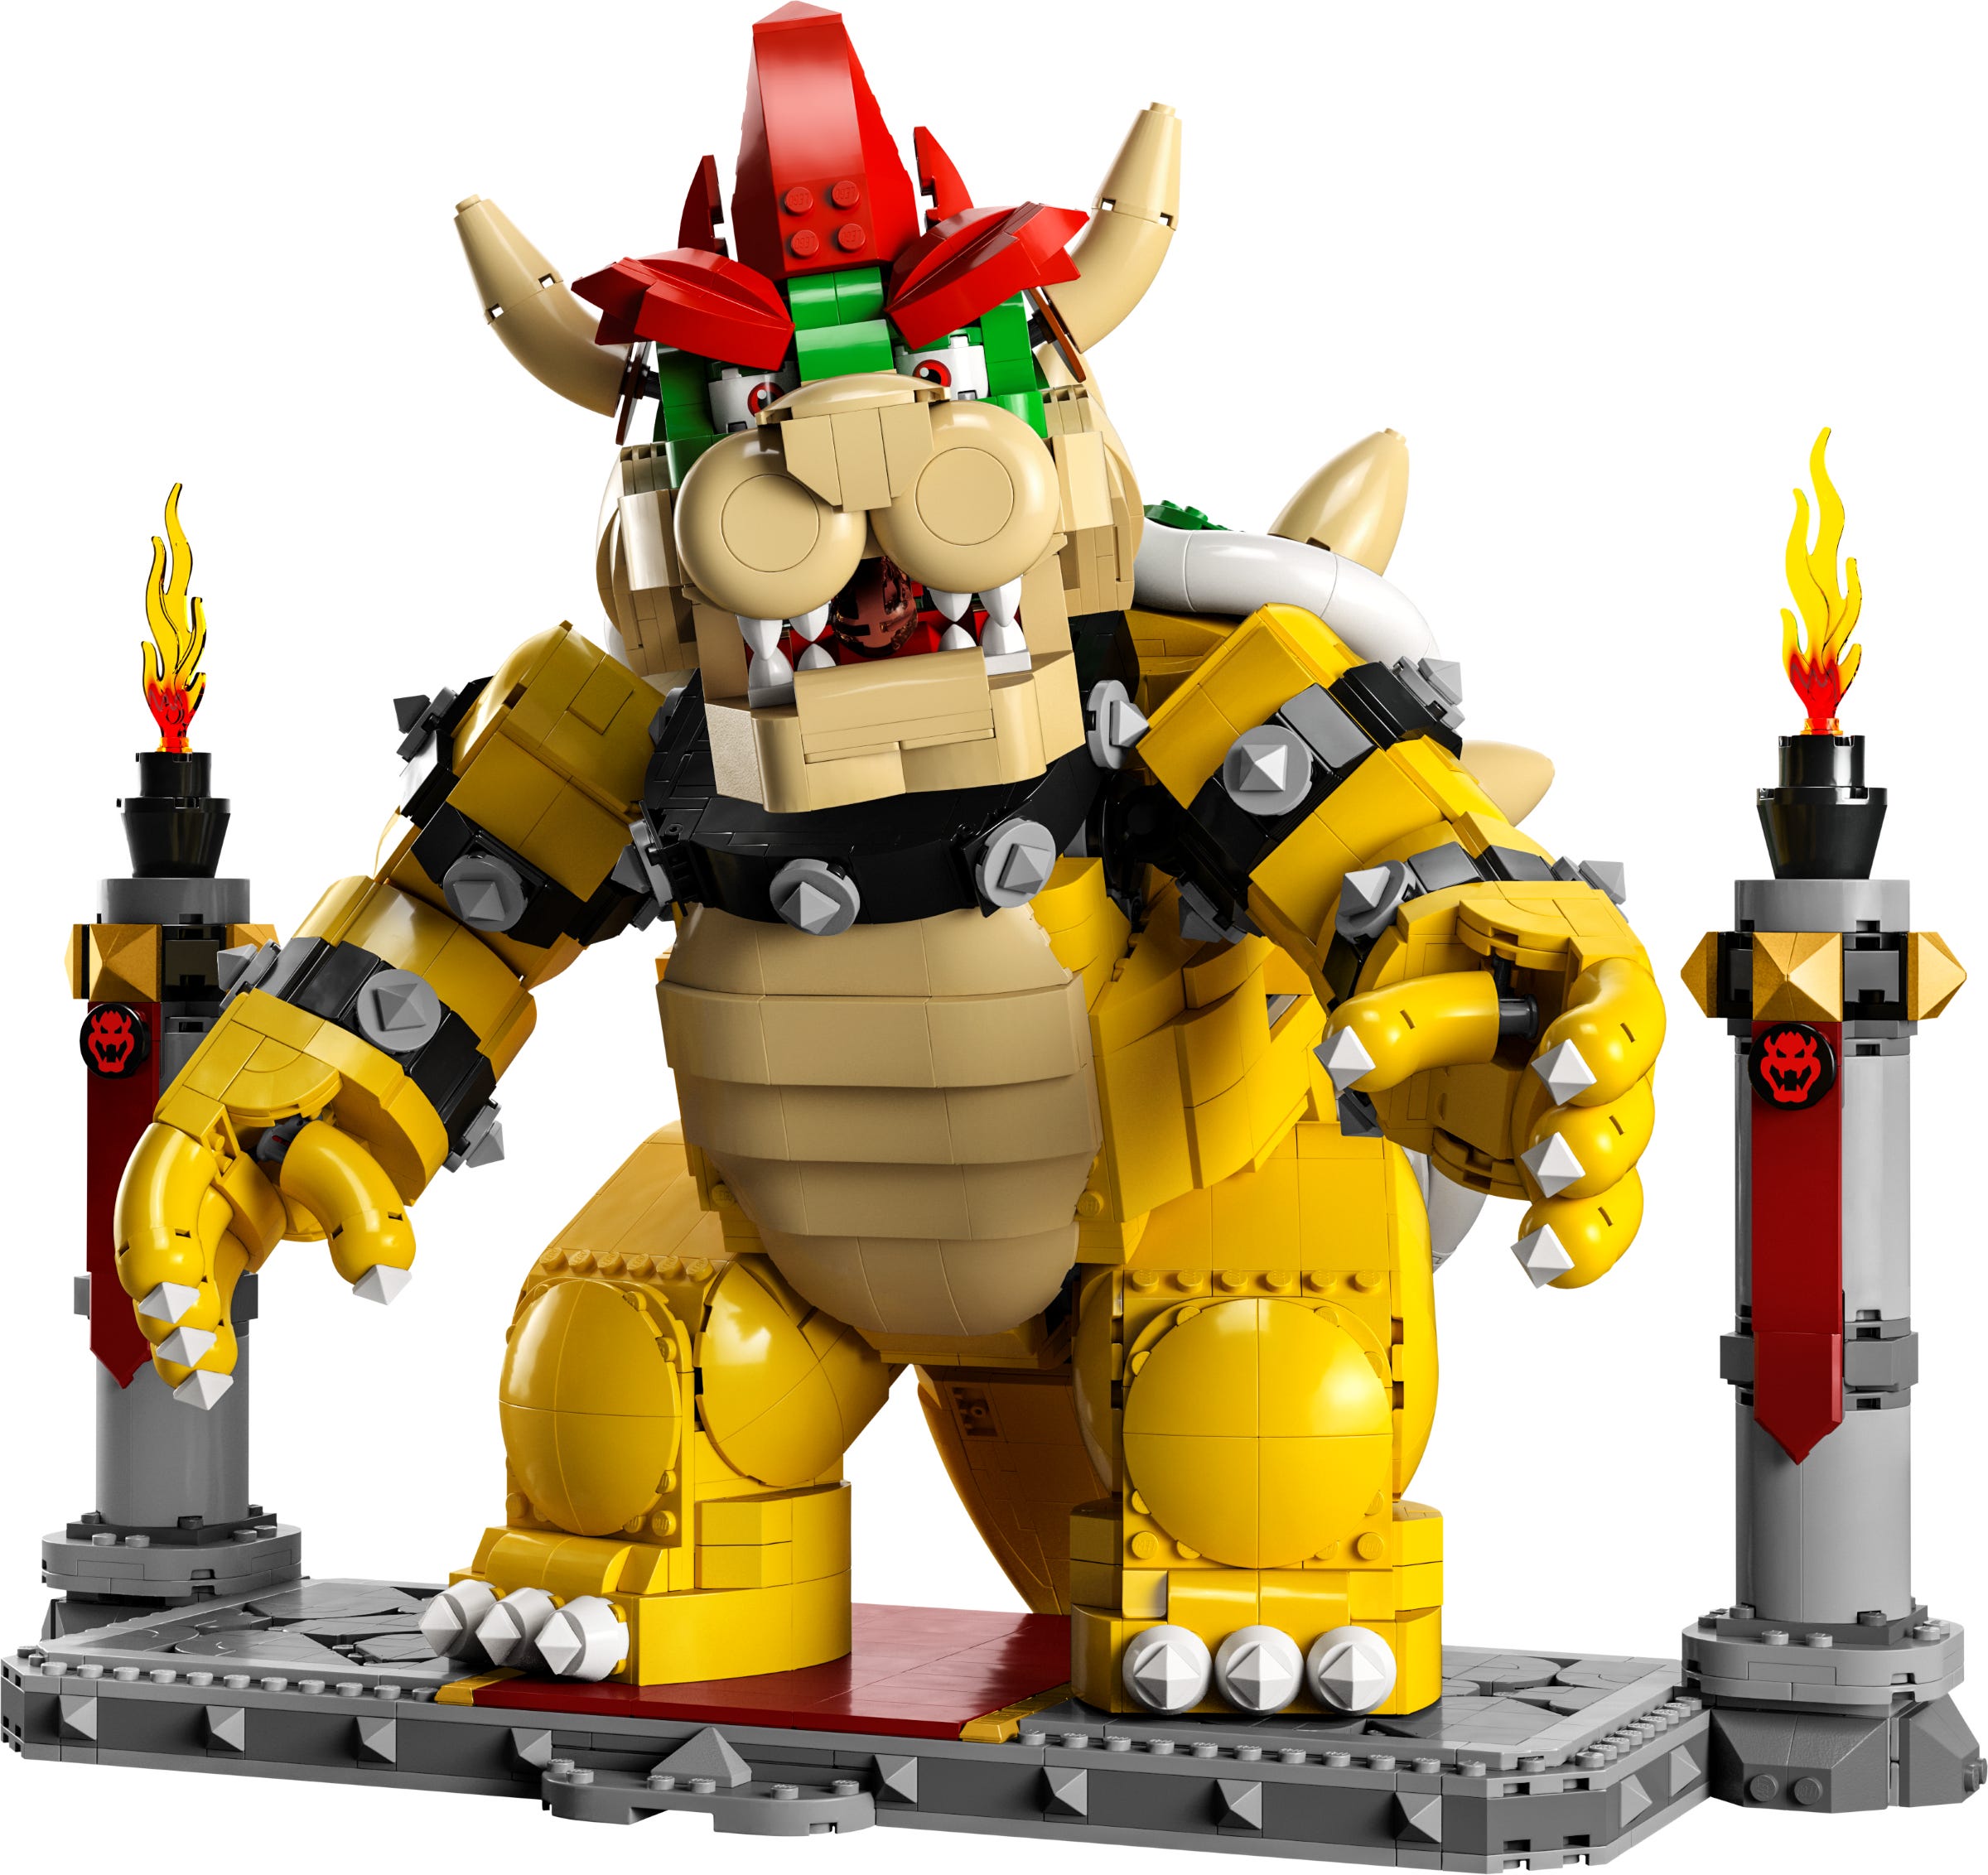 The Mighty Bowser"